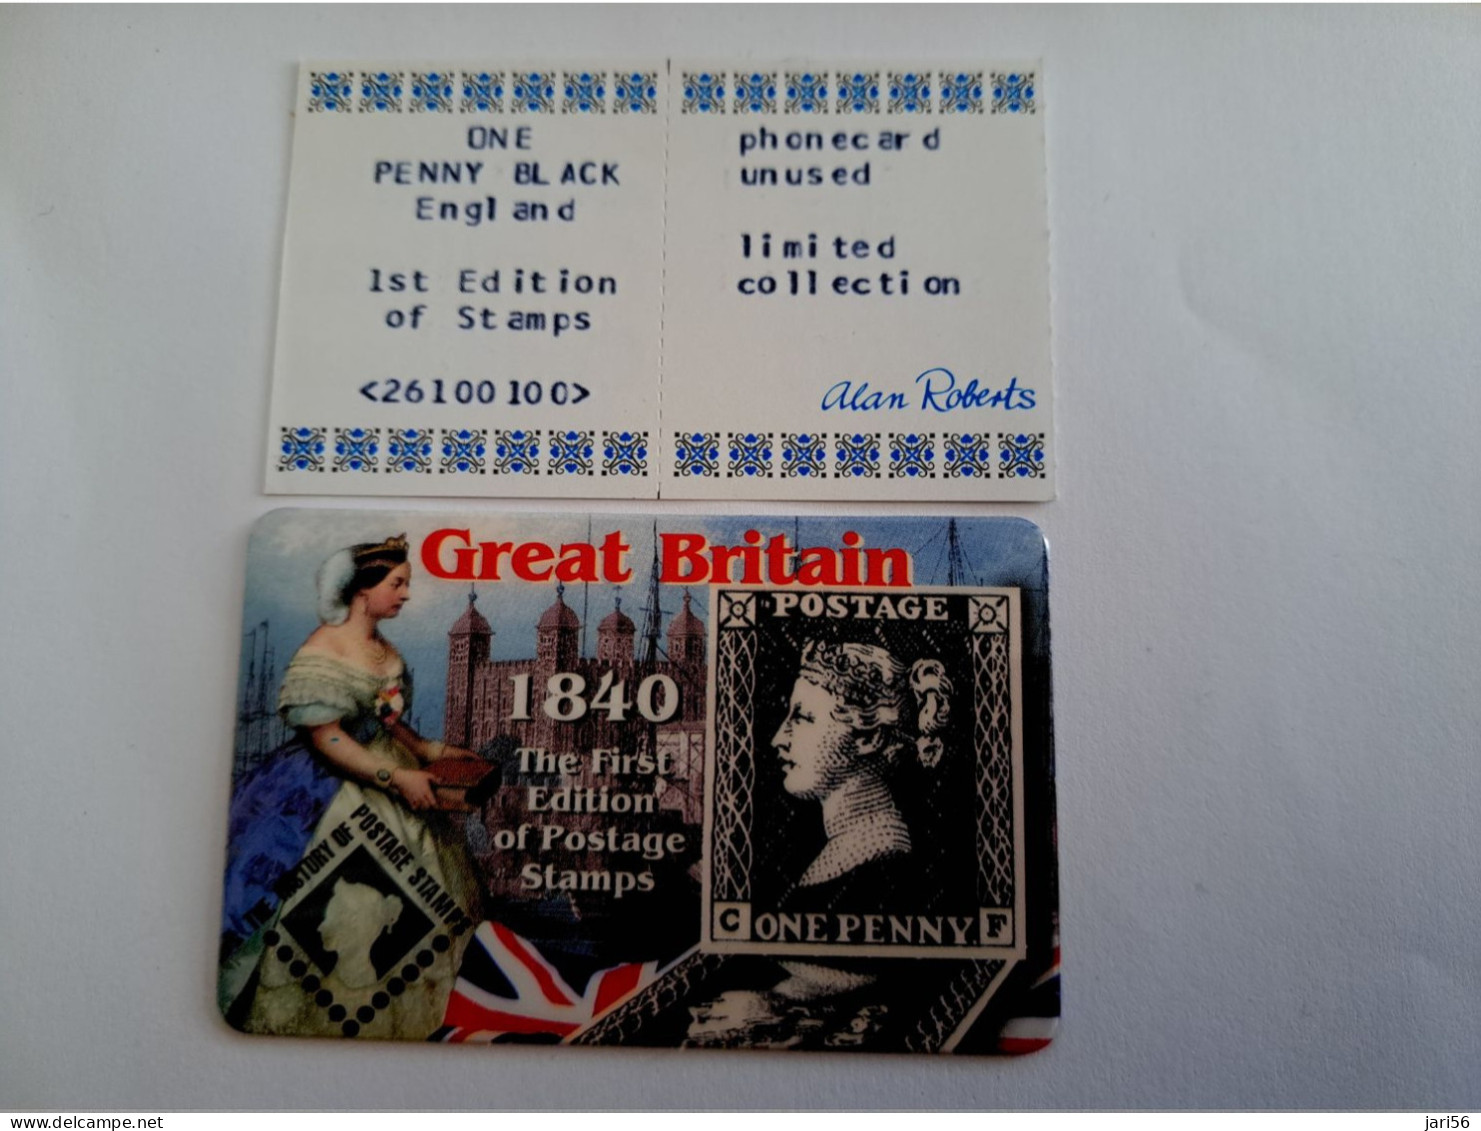 GREAT BRITAIN /20 UNITS / PENNY BLACK  1840 / DATE 06/2002     /    PREPAID CARD / LIMITED EDITION/ MINT  **15703** - Collections